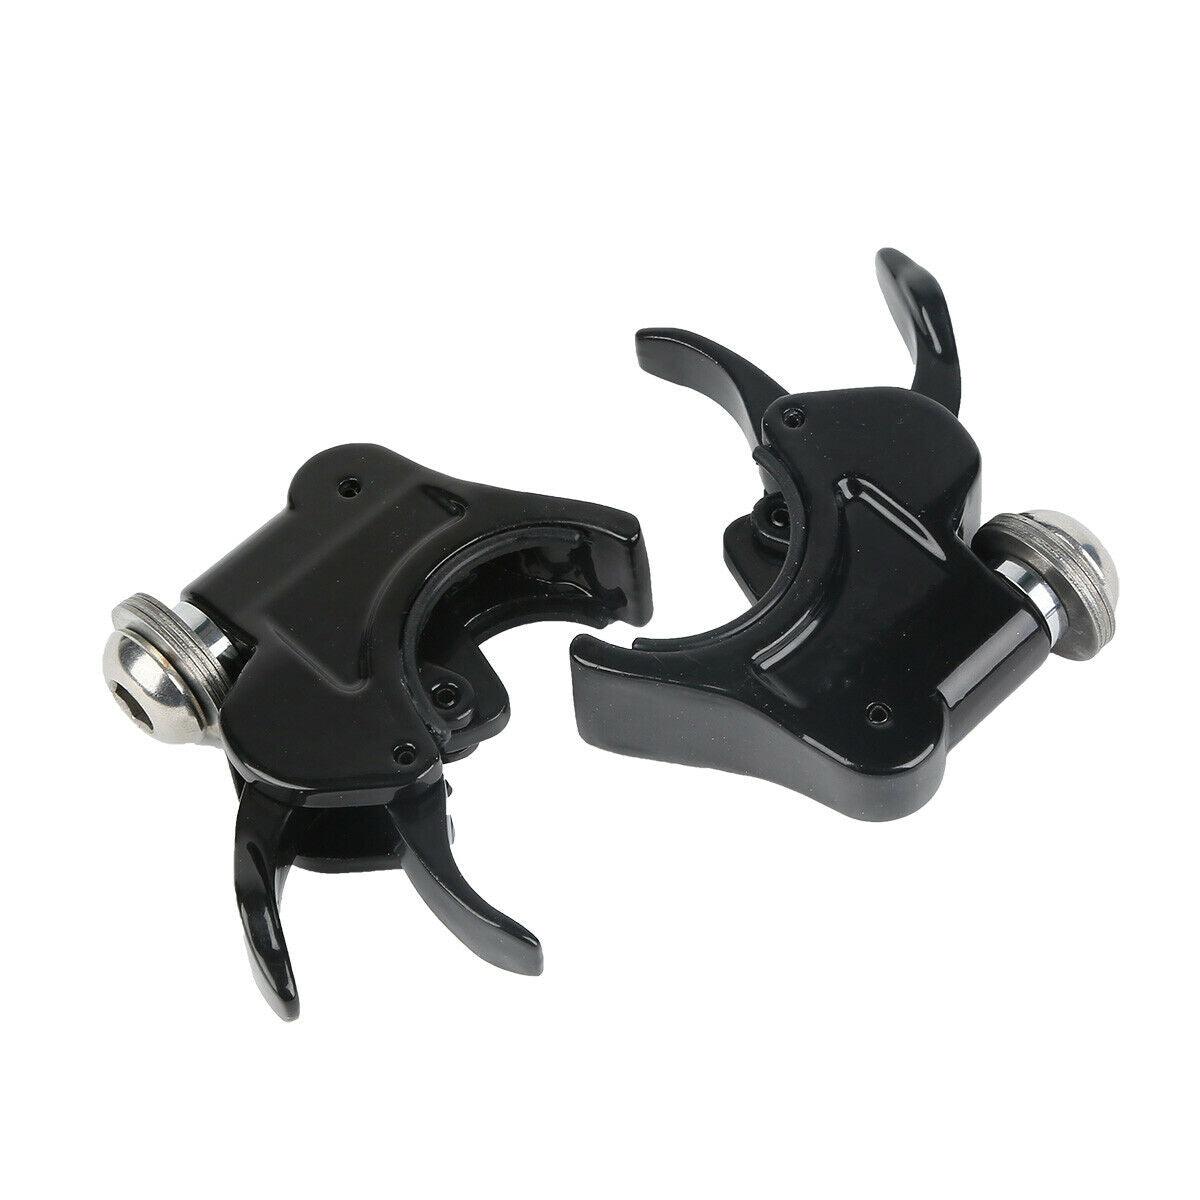 39mm Windshield Windscreen Clamp Fit For Harley Sportster XL 883 1200 Dyna Black - Moto Life Products